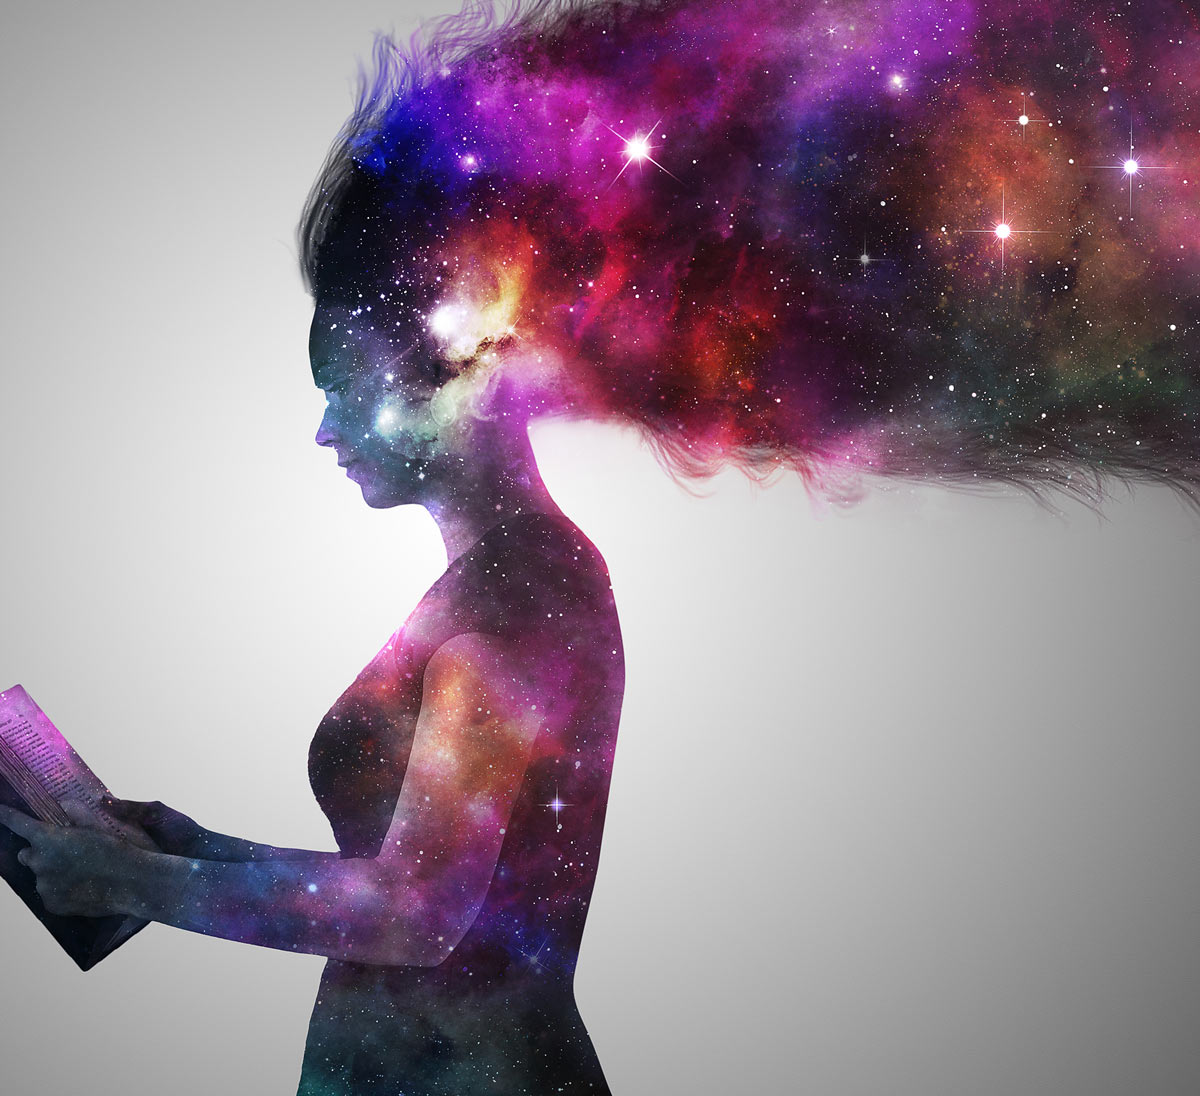 Girl reading a book with a beautiful cosmic universe showing within her silhouette